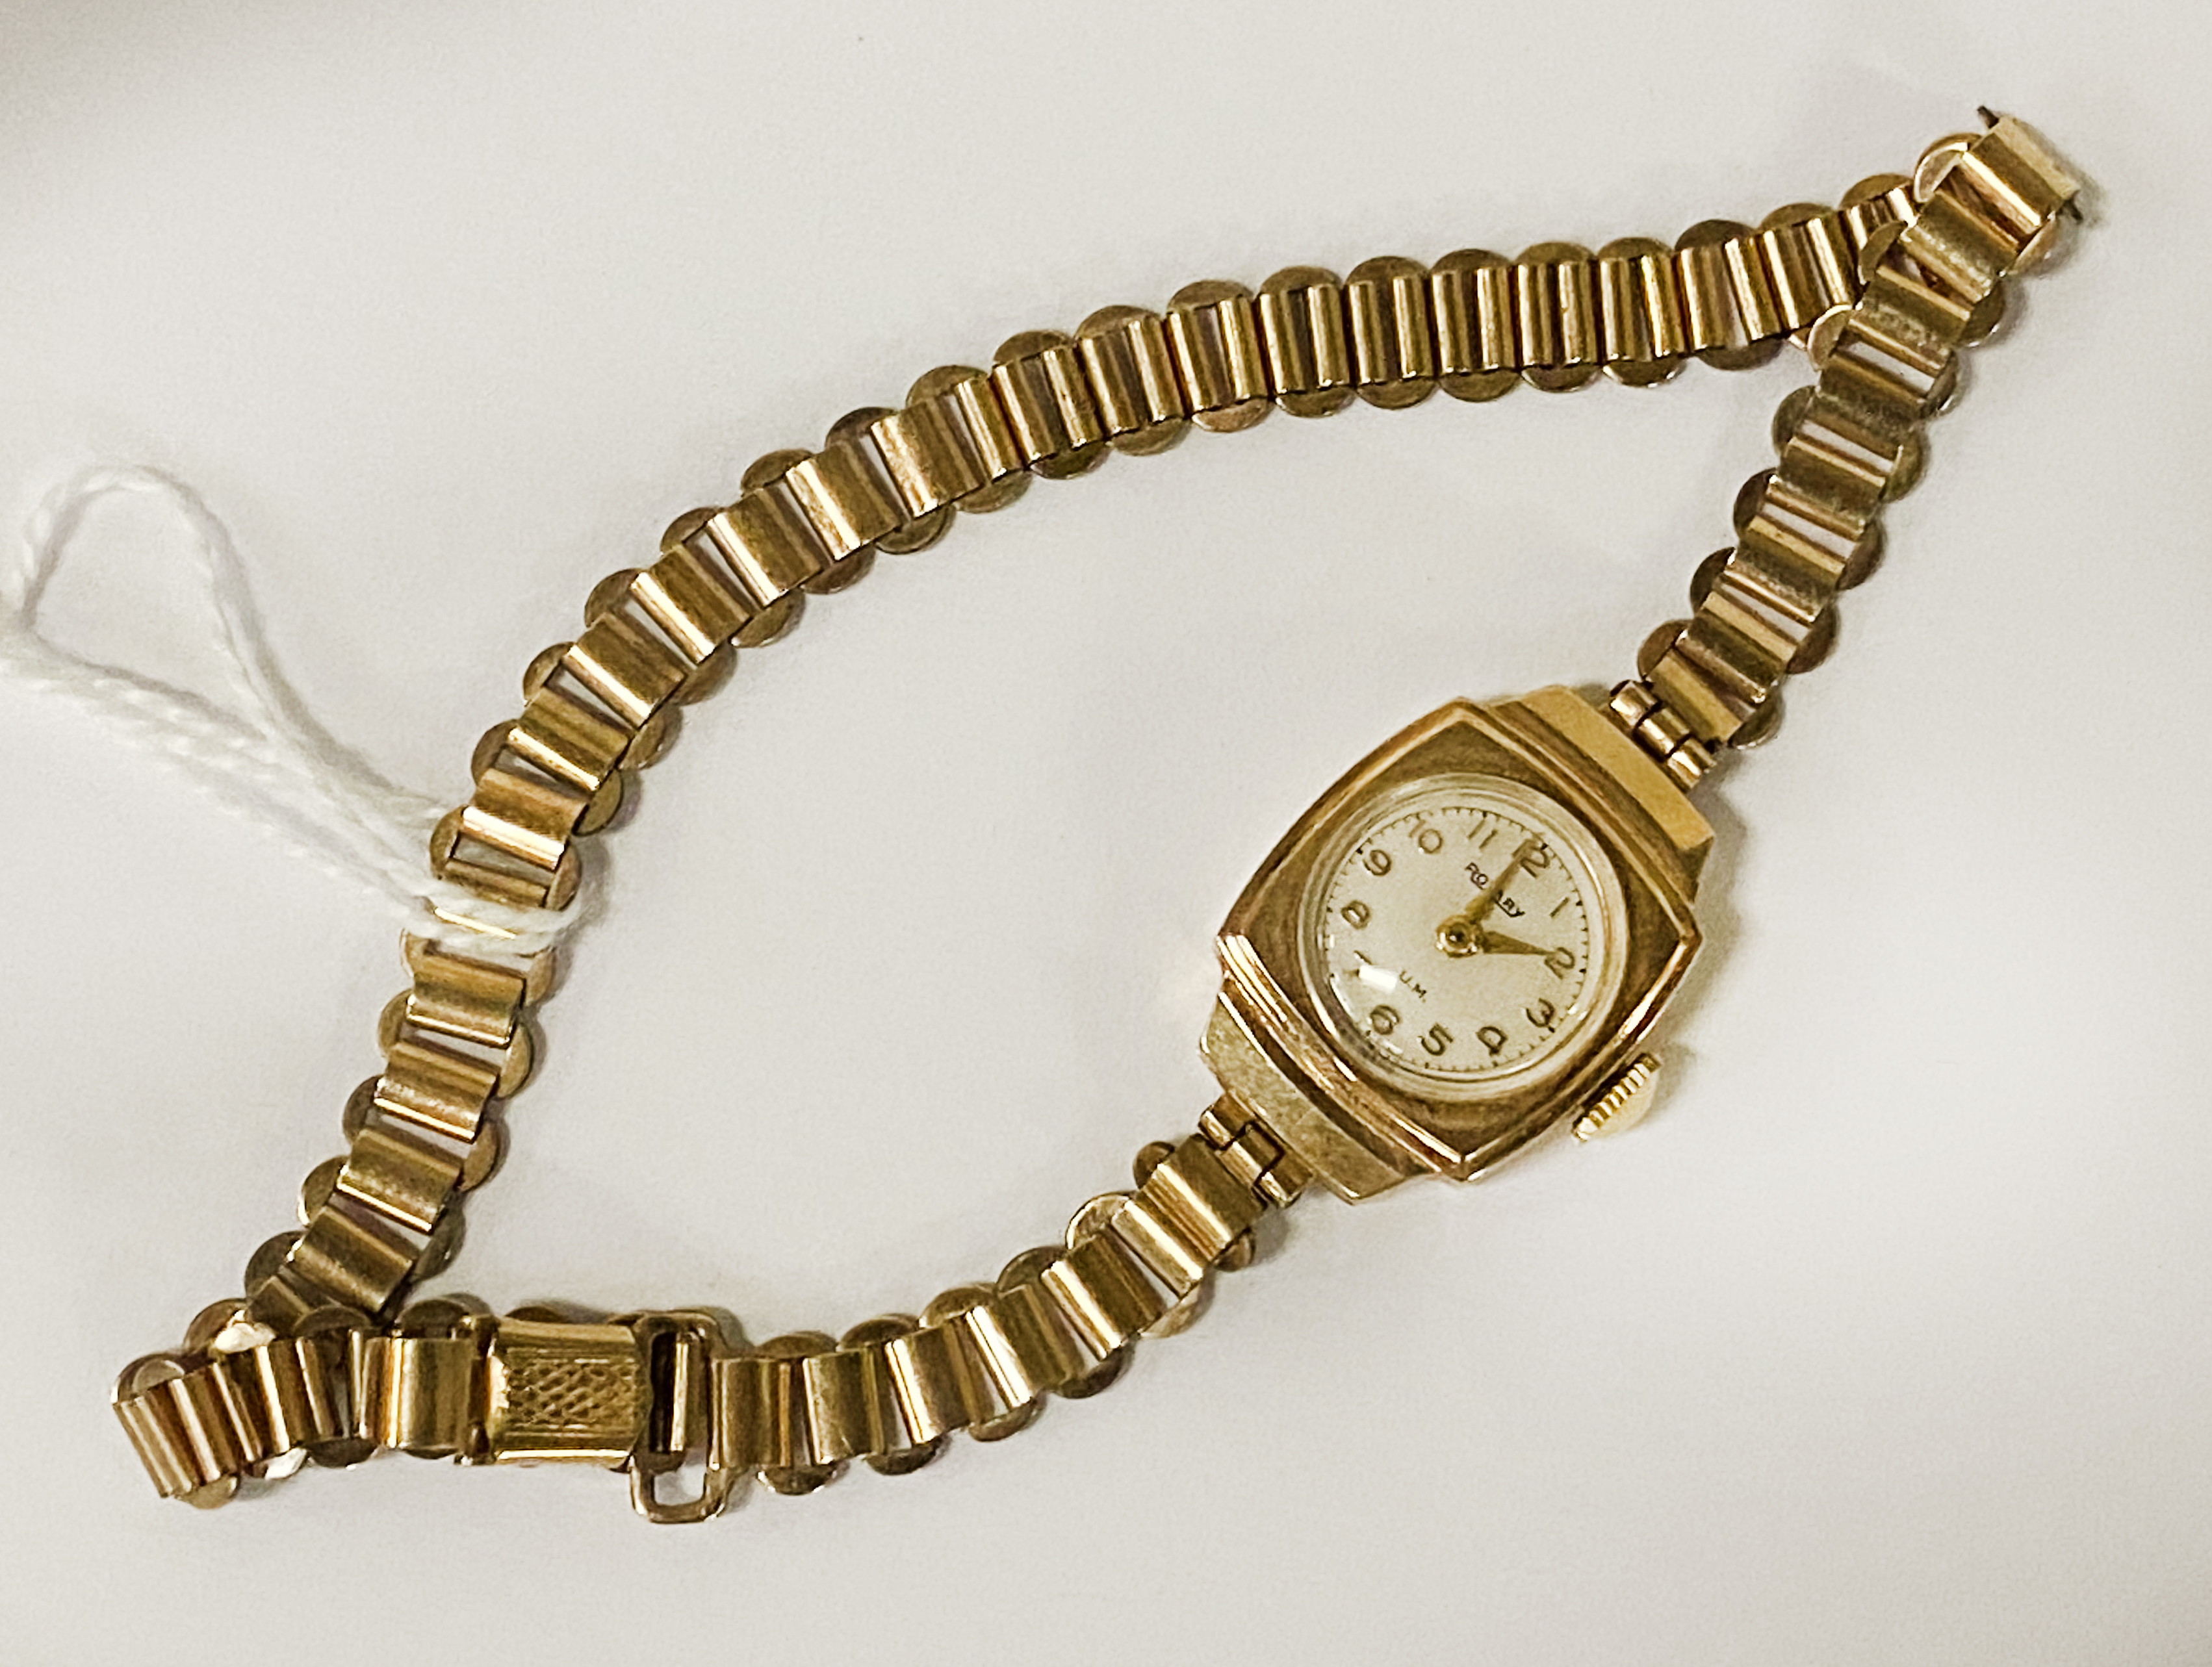 9 CARAT GOLD ROTARY COCKTAIL WATCH STRAP MARKED RG